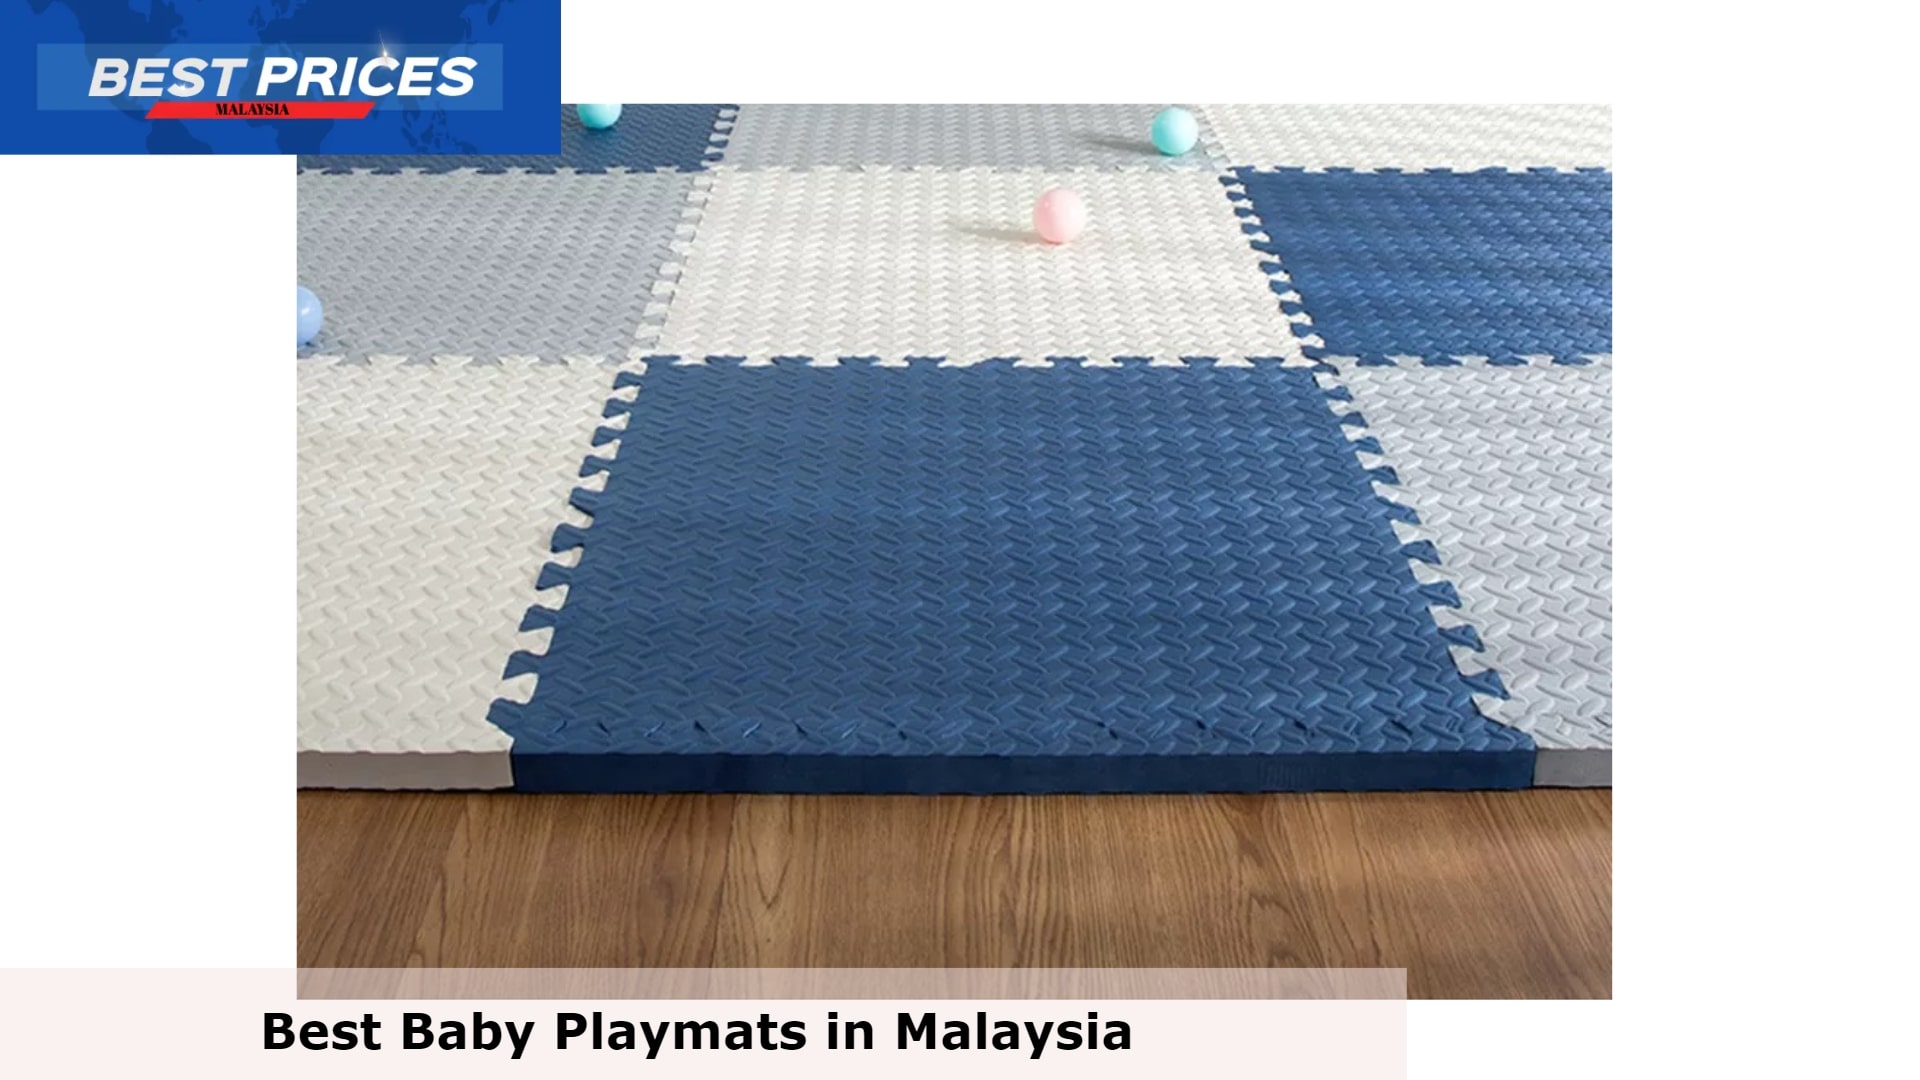 WEFILM Fashion Play Mat - Baby Playmat Malaysia, Baby Playmat Malaysia,
What age do babies like playmats?,
Which playmat is the best in Malaysia?,
When should I introduce a playmat?,
Can babies nap on playmats?,
How long do you leave baby on playmat?,
baby play mat malaysia,
baby foam play mat malaysia,
best playmat for baby malaysia,
is play mat good for baby,
baby play mat age limit,
best play mat for 3 month old,